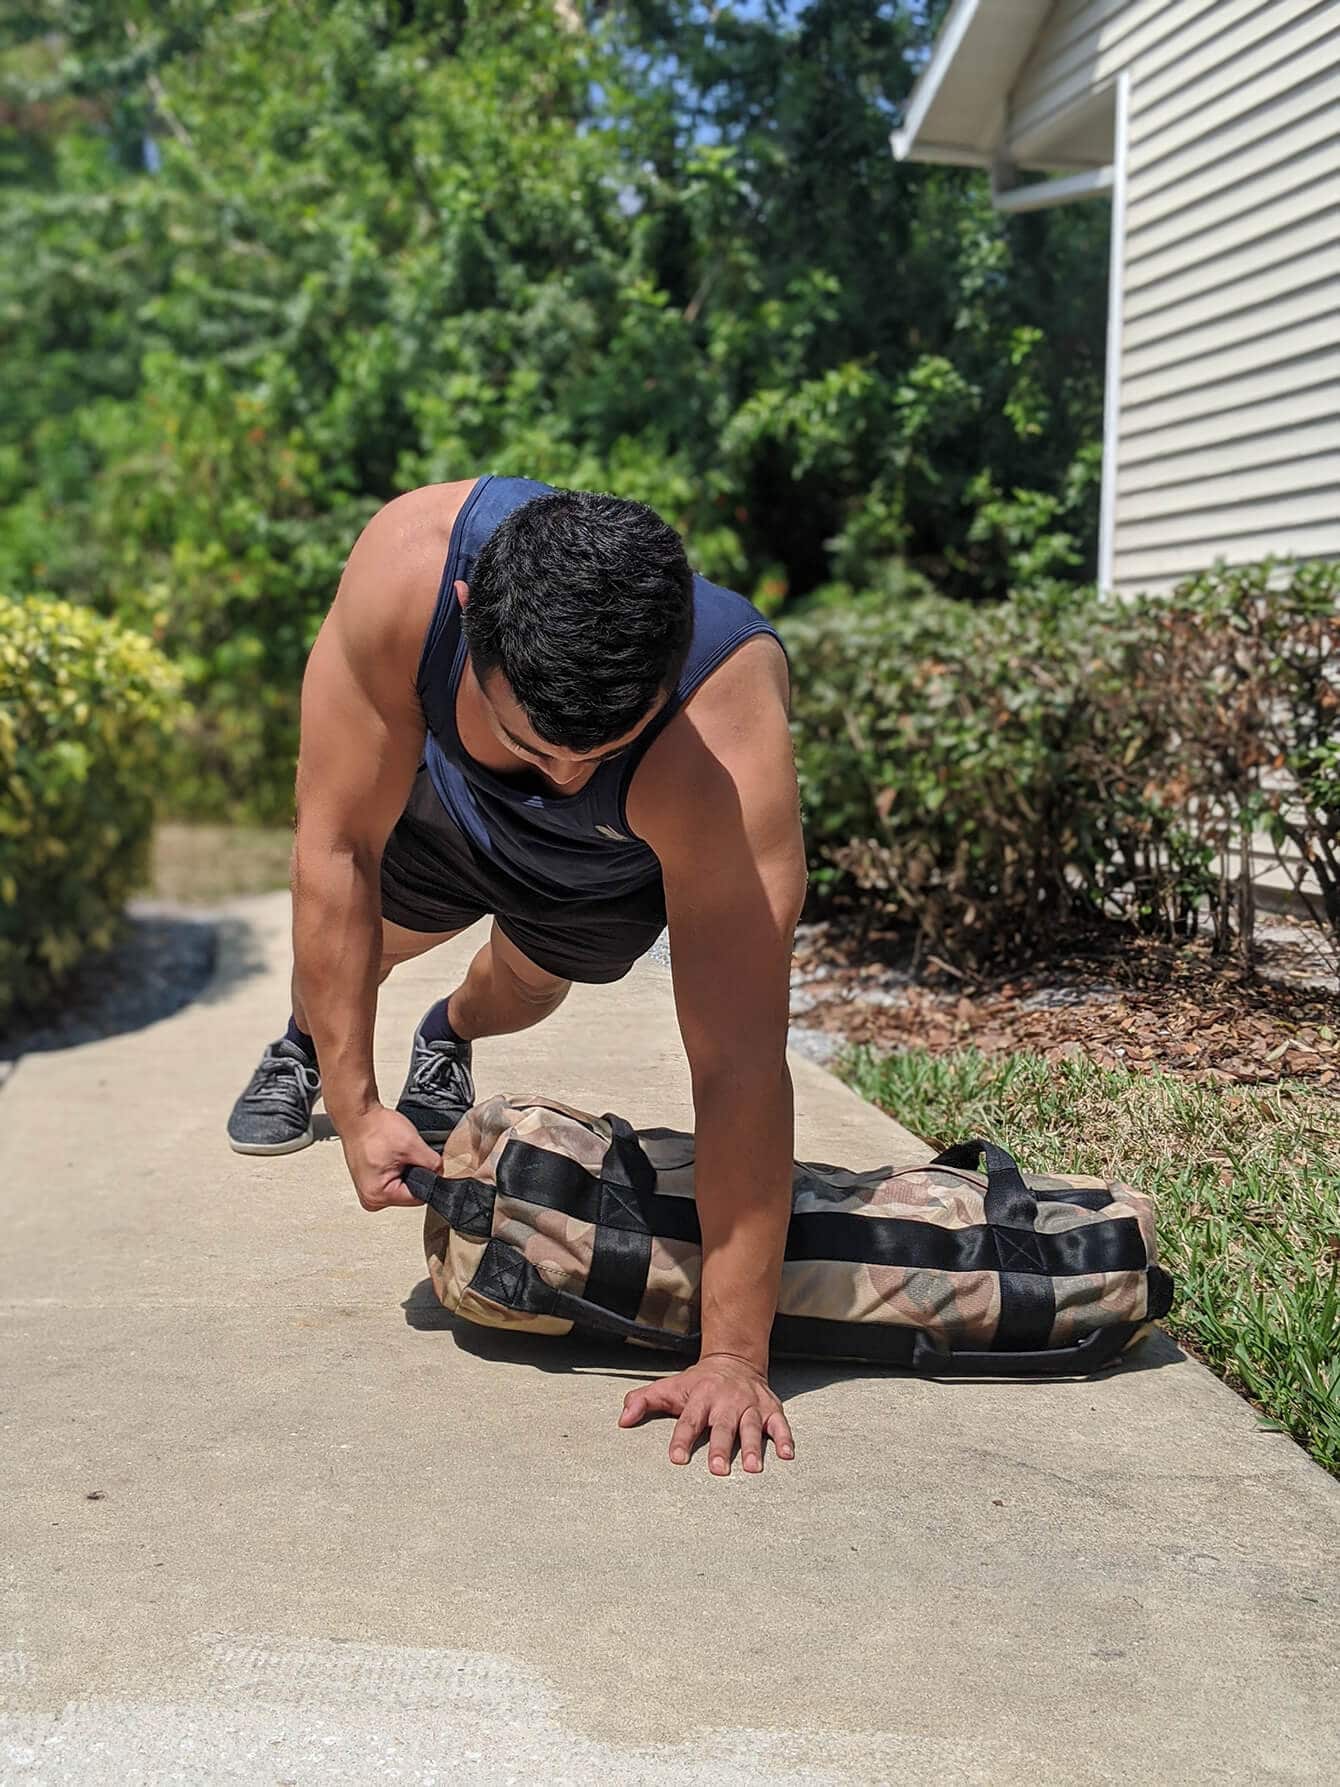 How to Build Your Own Home Workout Sandbag